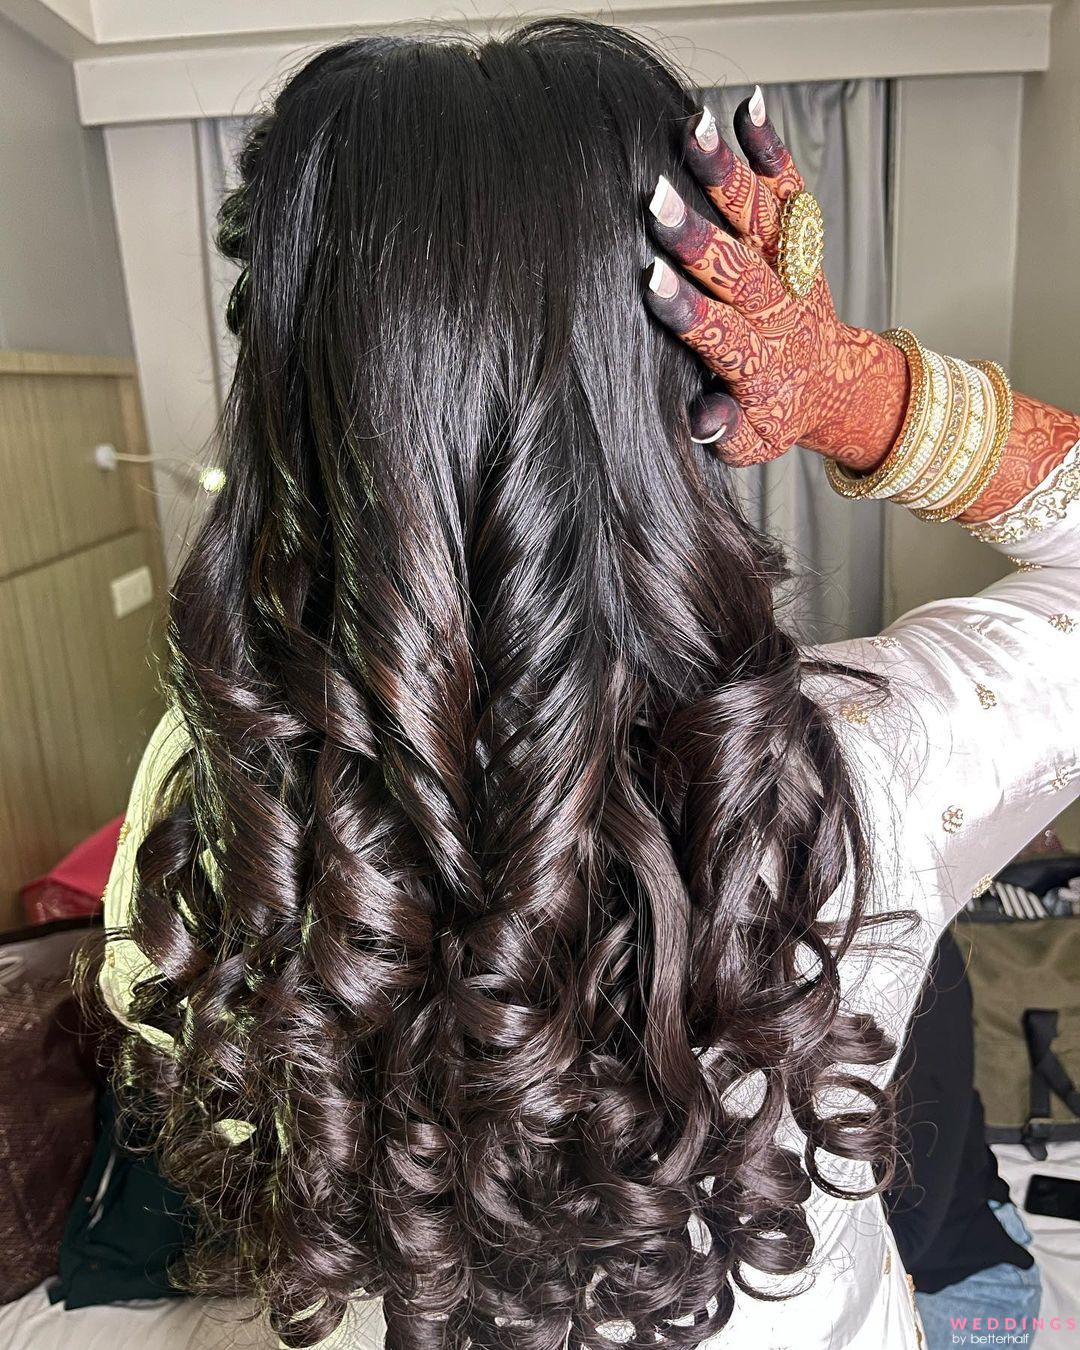 Latest Bridal Hairstyles Looks for Curly Hair | Hair styles, Bride  hairstyles, Crown hairstyles